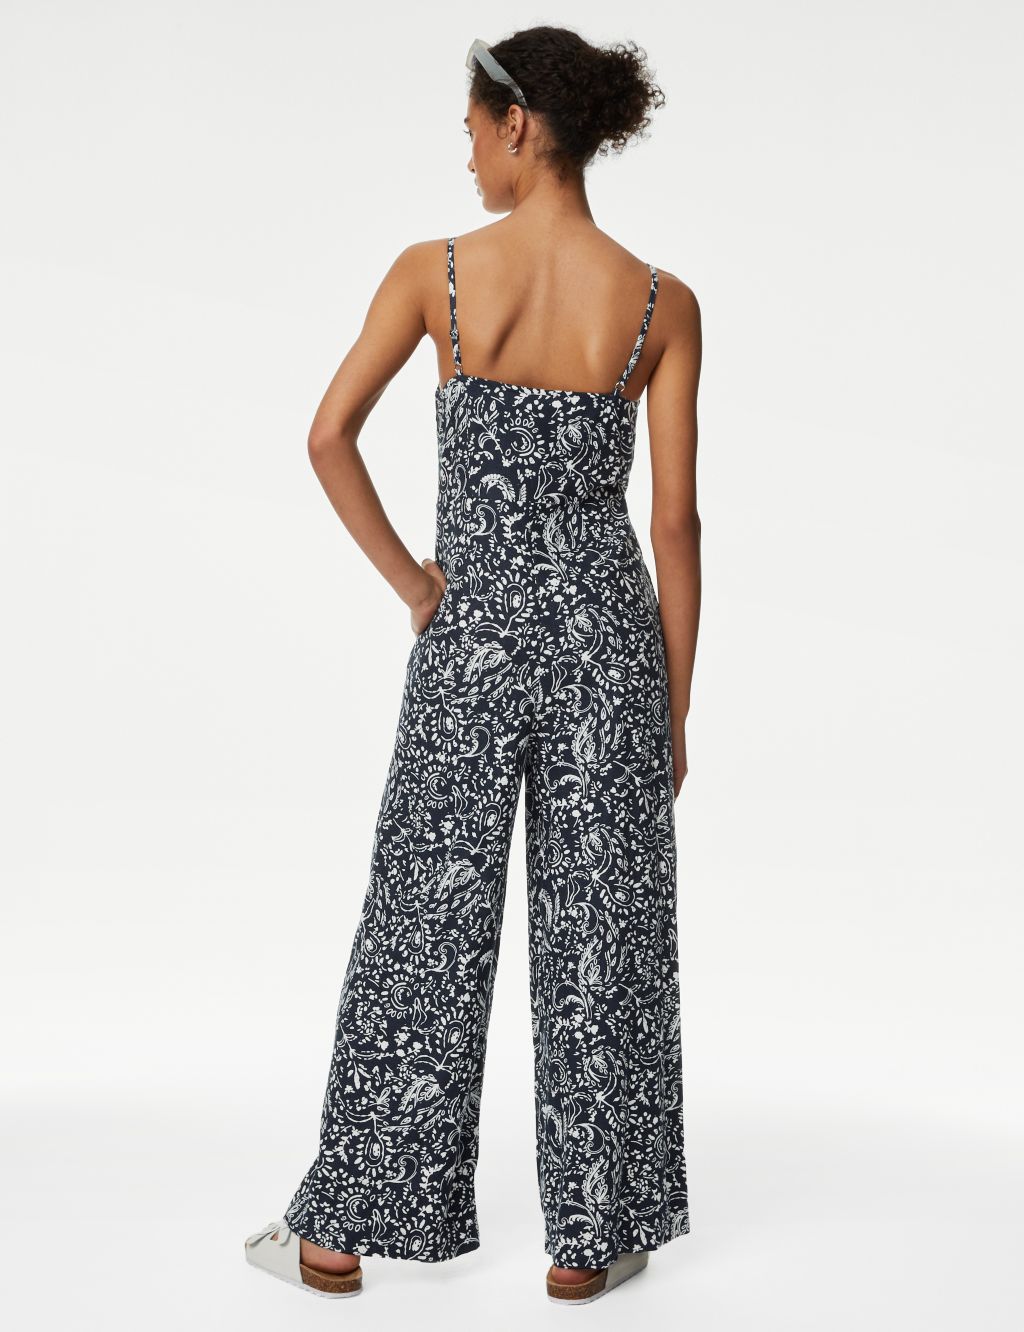 Linen Rich Printed Sleeveless Jumpsuit image 3